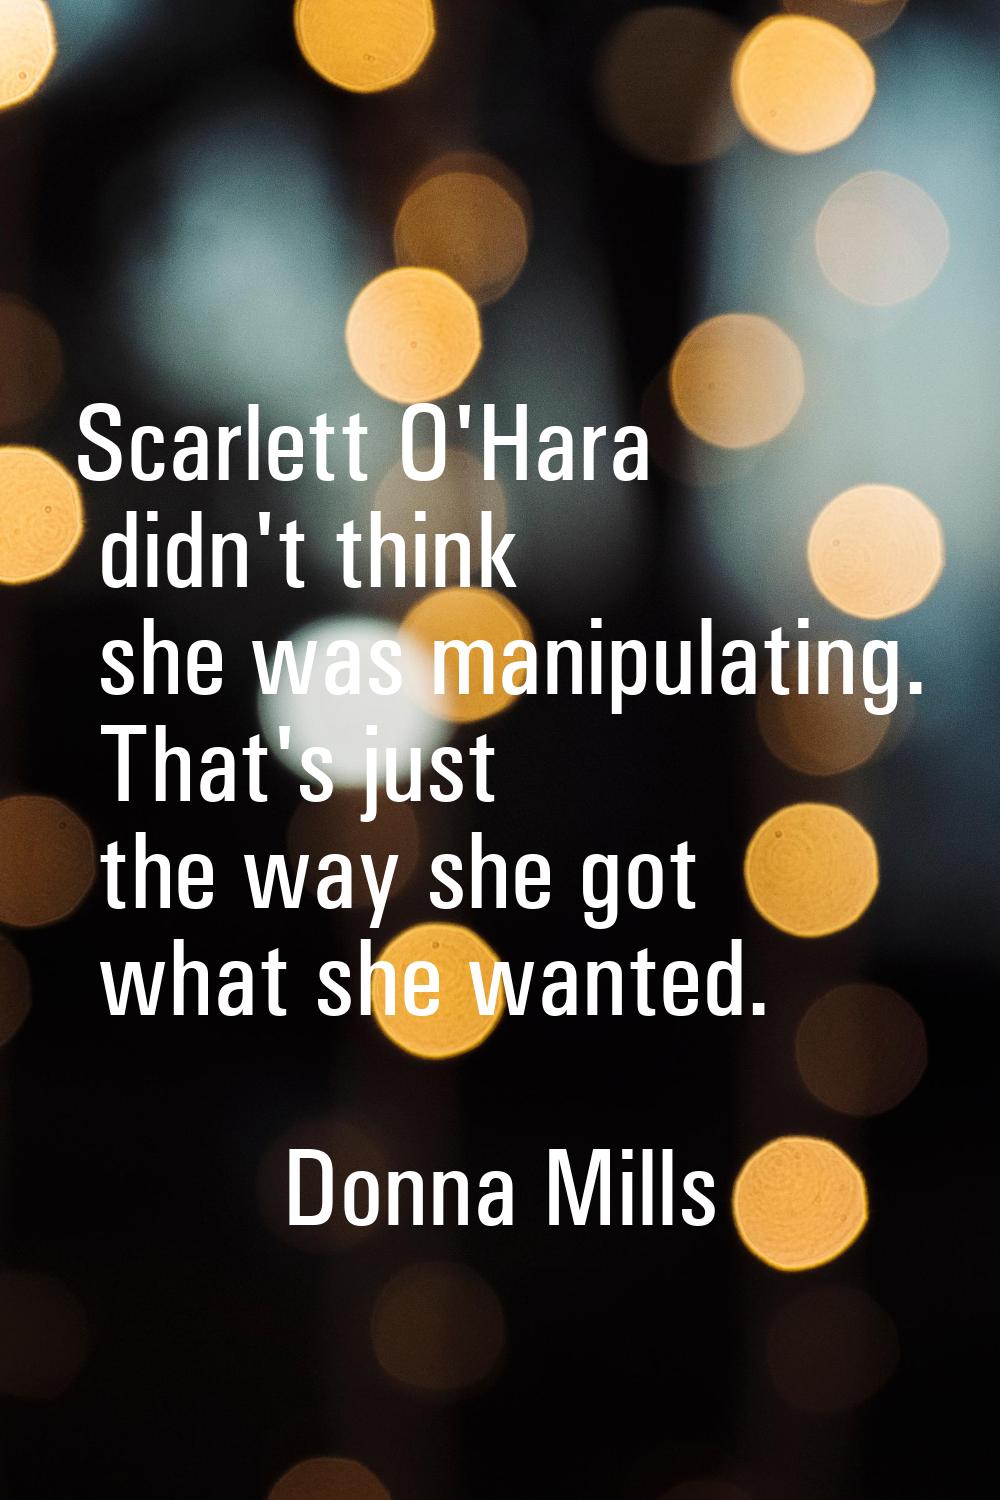 Scarlett O'Hara didn't think she was manipulating. That's just the way she got what she wanted.